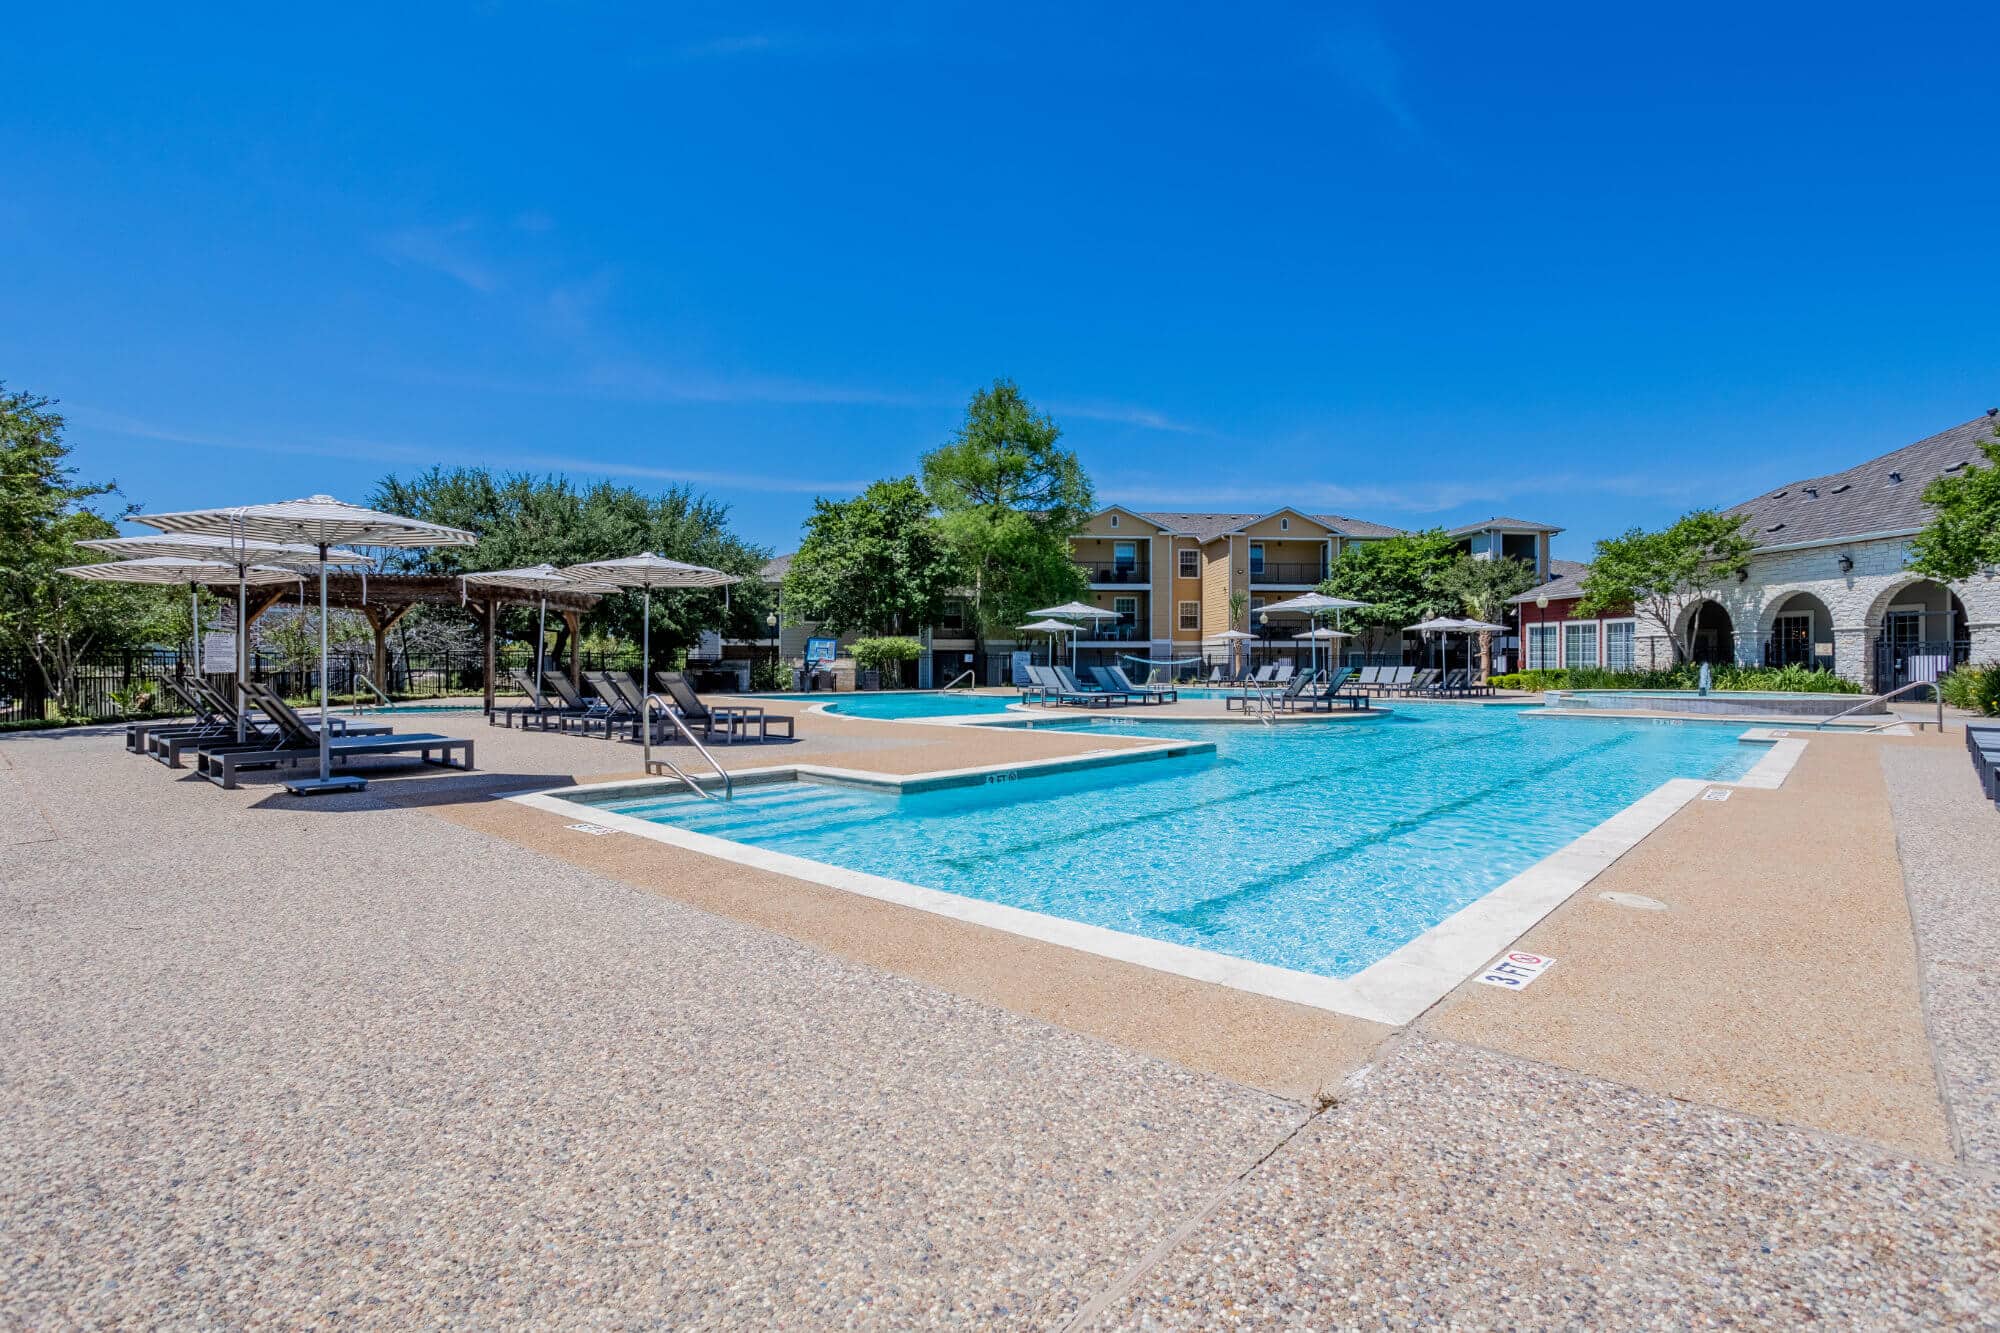 university trails college station off campus apartments near texas a m resort style pool with lounge seating